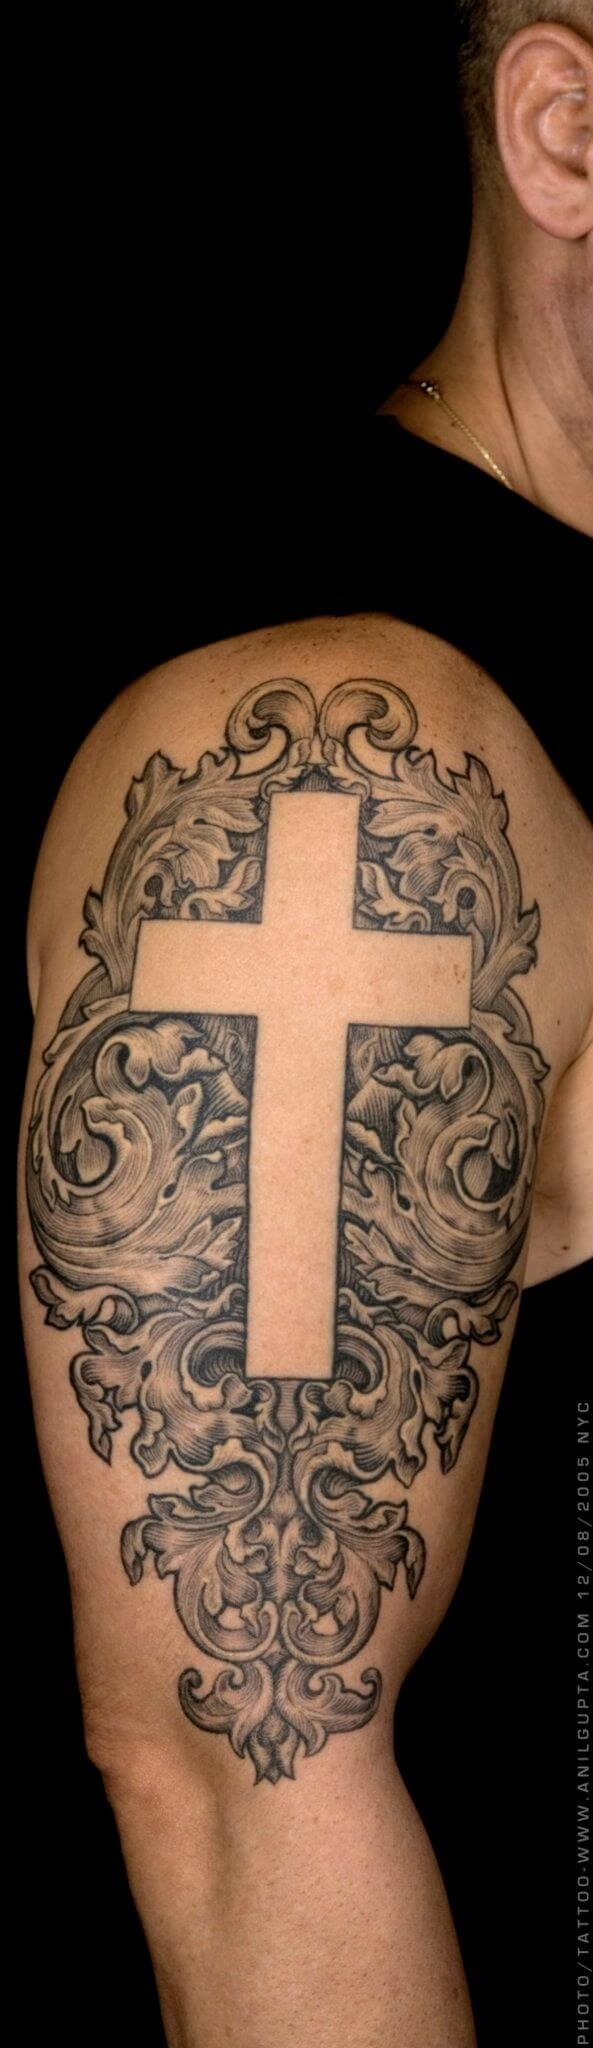 56 Best Cross Tattoos For Men Improb within sizing 593 X 2048